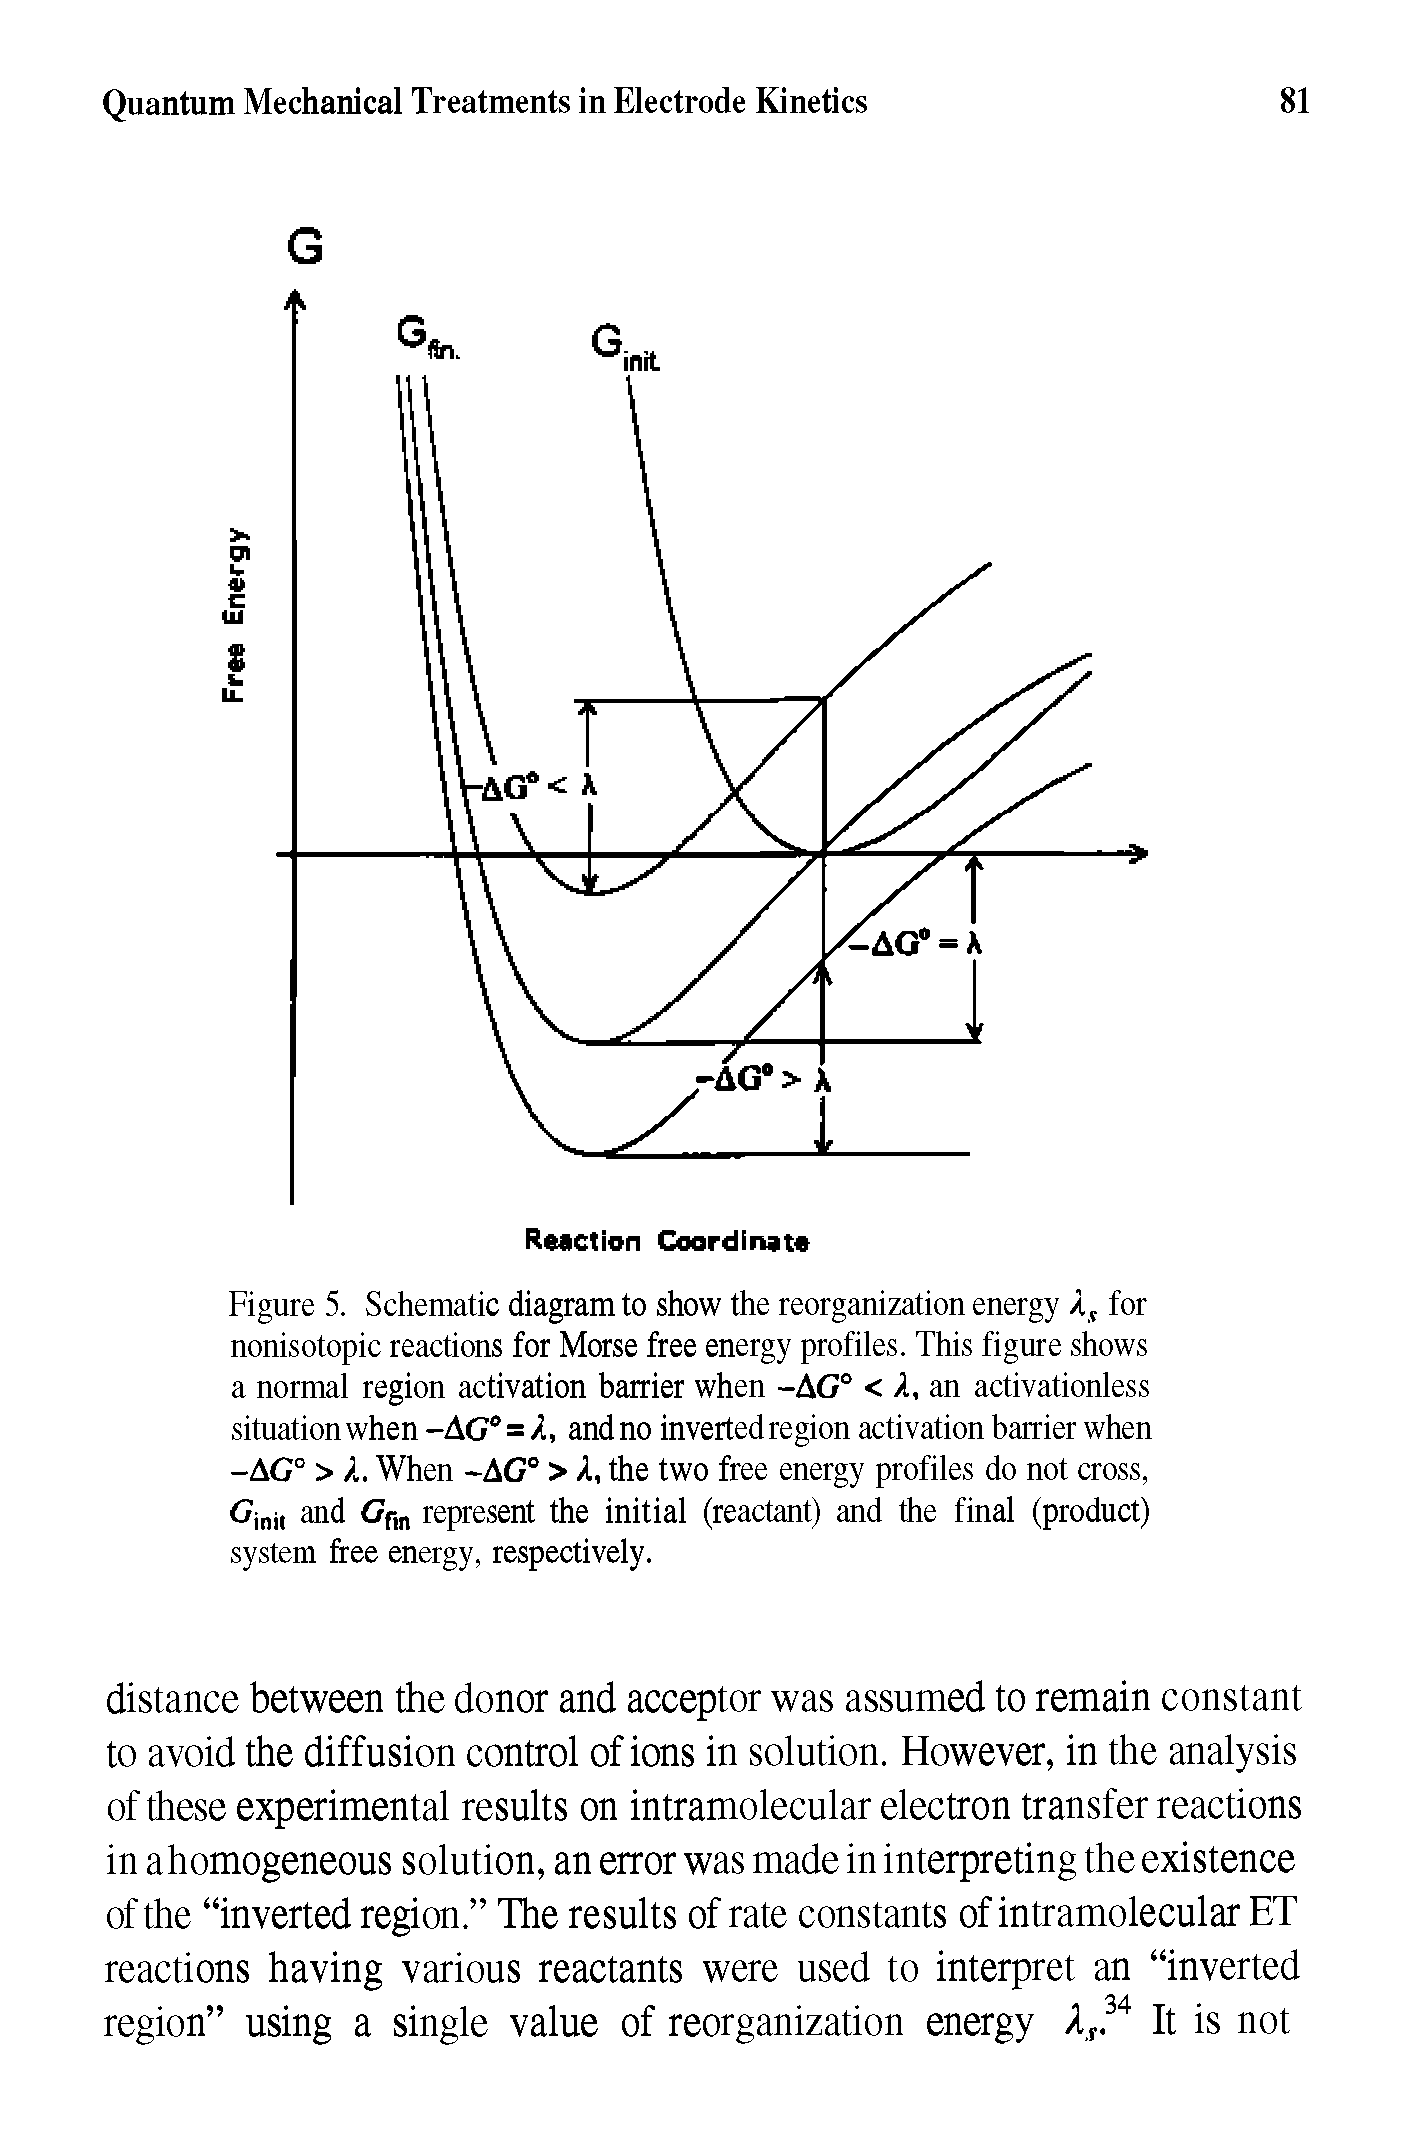 Figure 5. Schematic diagram to show the reorganization energy A, for nonisotopic reactions for Morse free energy profiles. This figure shows a normal region activation barrier when -AG° < A, an activationless situation when -AC° =, and no inverted region activation barrier when -AC° > A. When -AG° > A, the two free energy profiles do not cross, Cjni, and Gn represent the initial (reactant) and the final (product) system free energy, respectively.